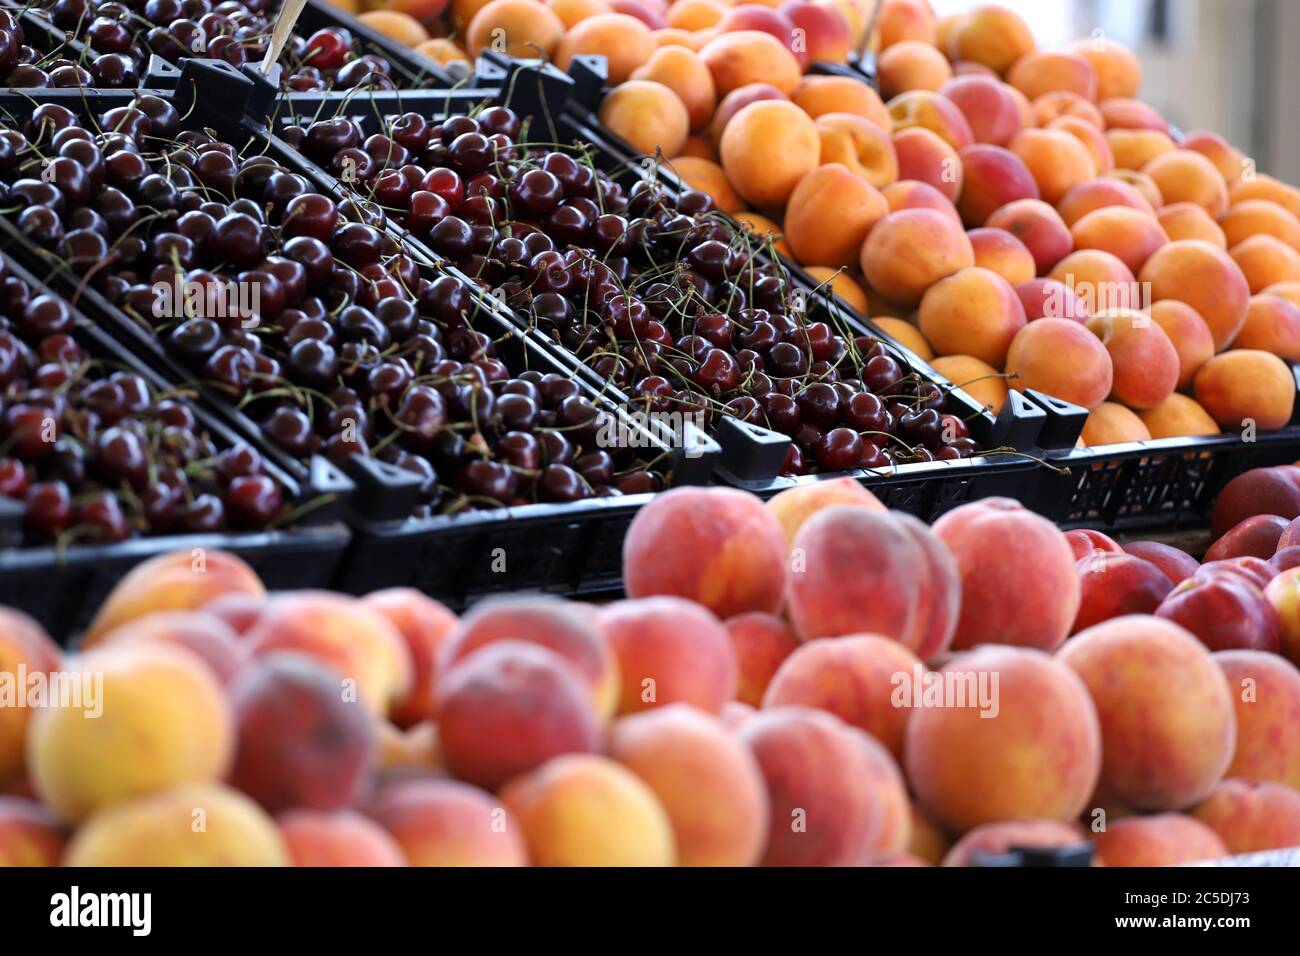 Cherries, peaches, nectarines and apricots on a market. Fruits pattern Stock Photo